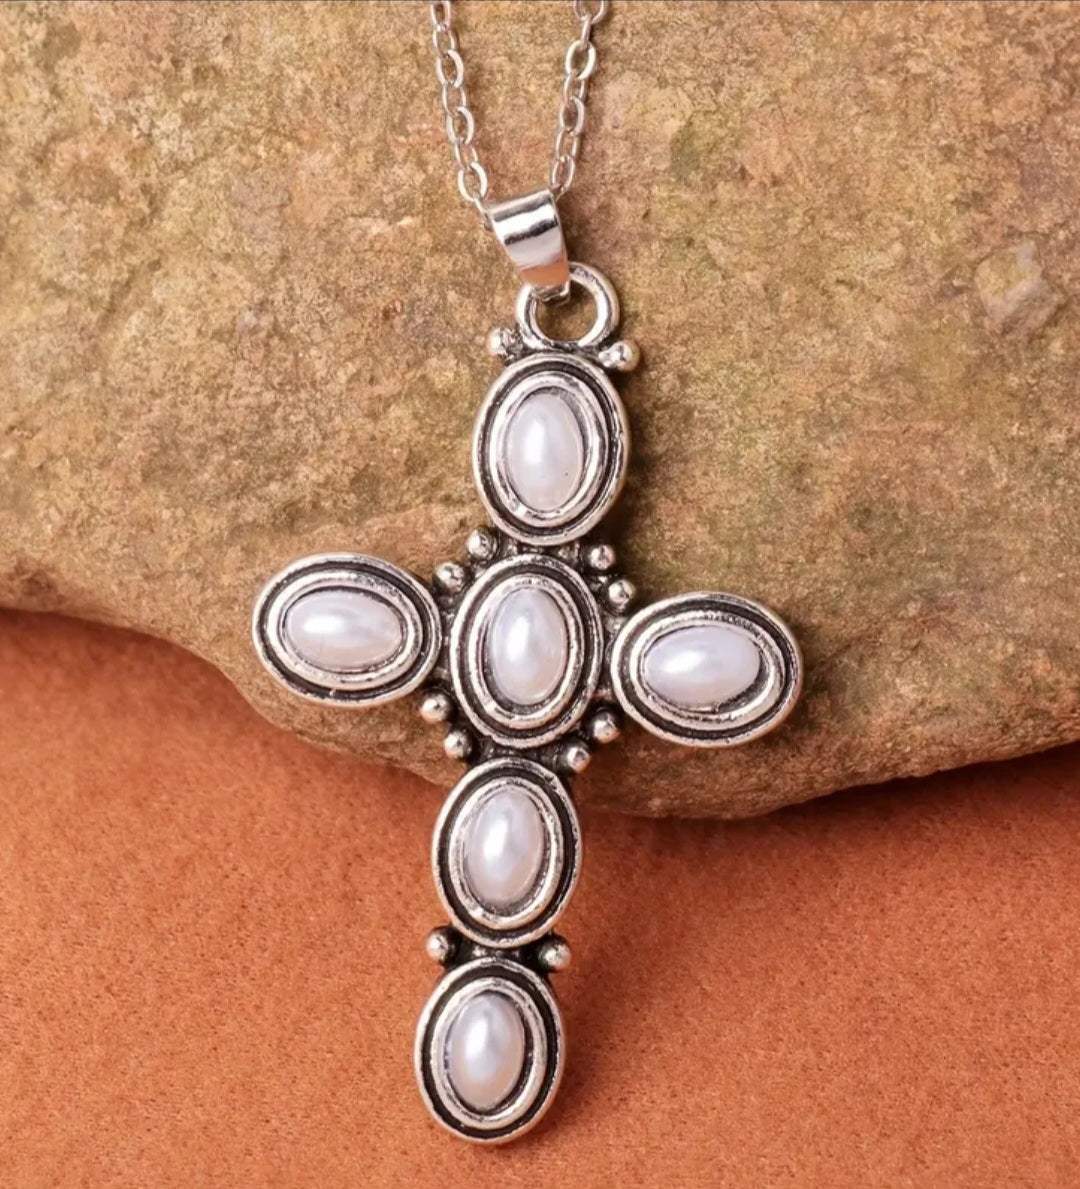 Cross Necklace with Faux Pearls